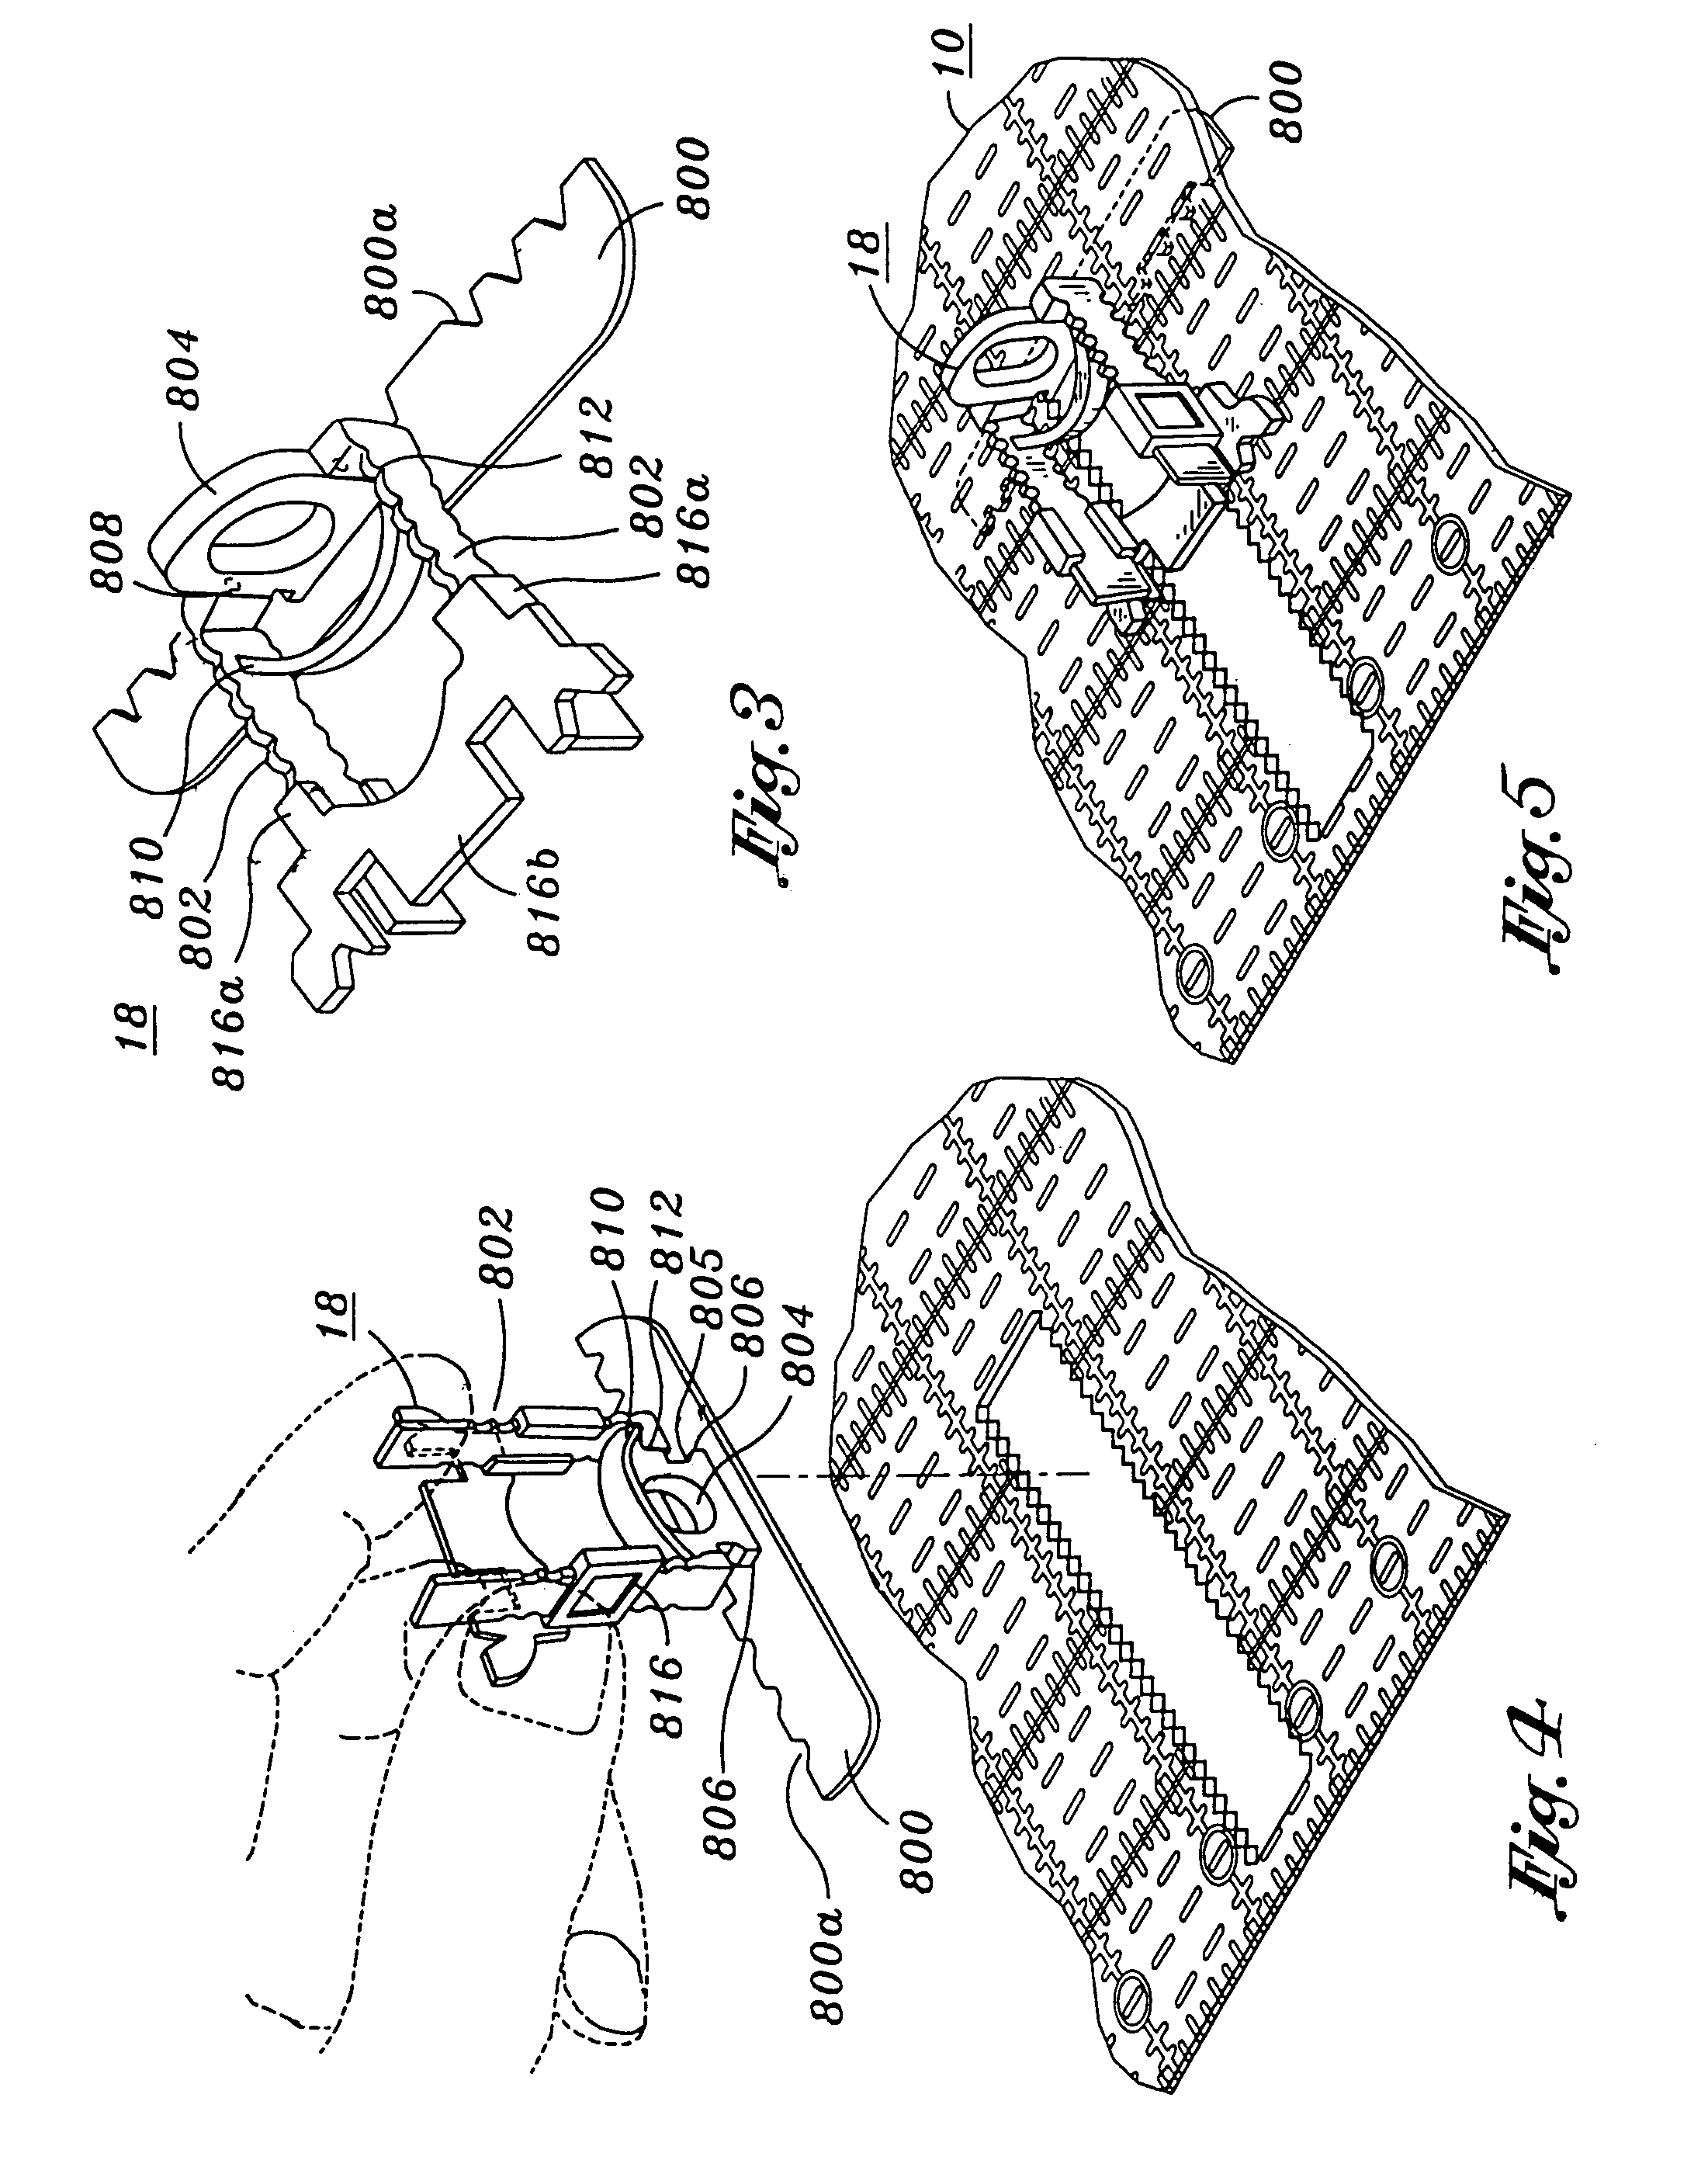 Transparent measuring device with seam allowance guide